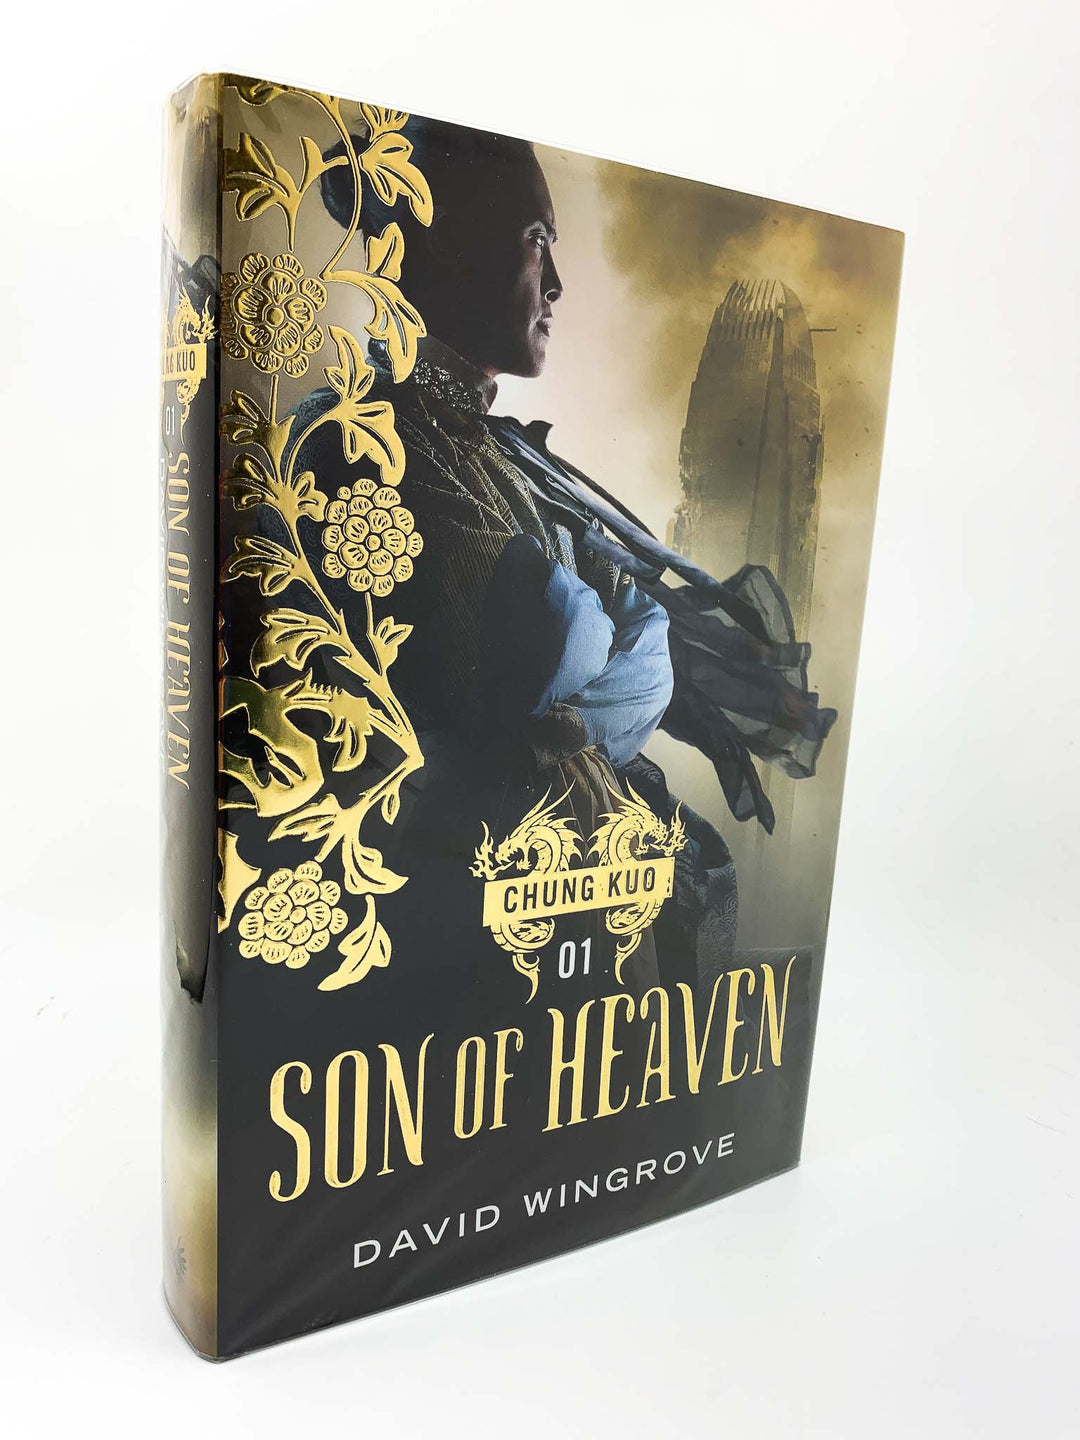 Wingrove, Dean - Son of Heaven - SIGNED | front cover